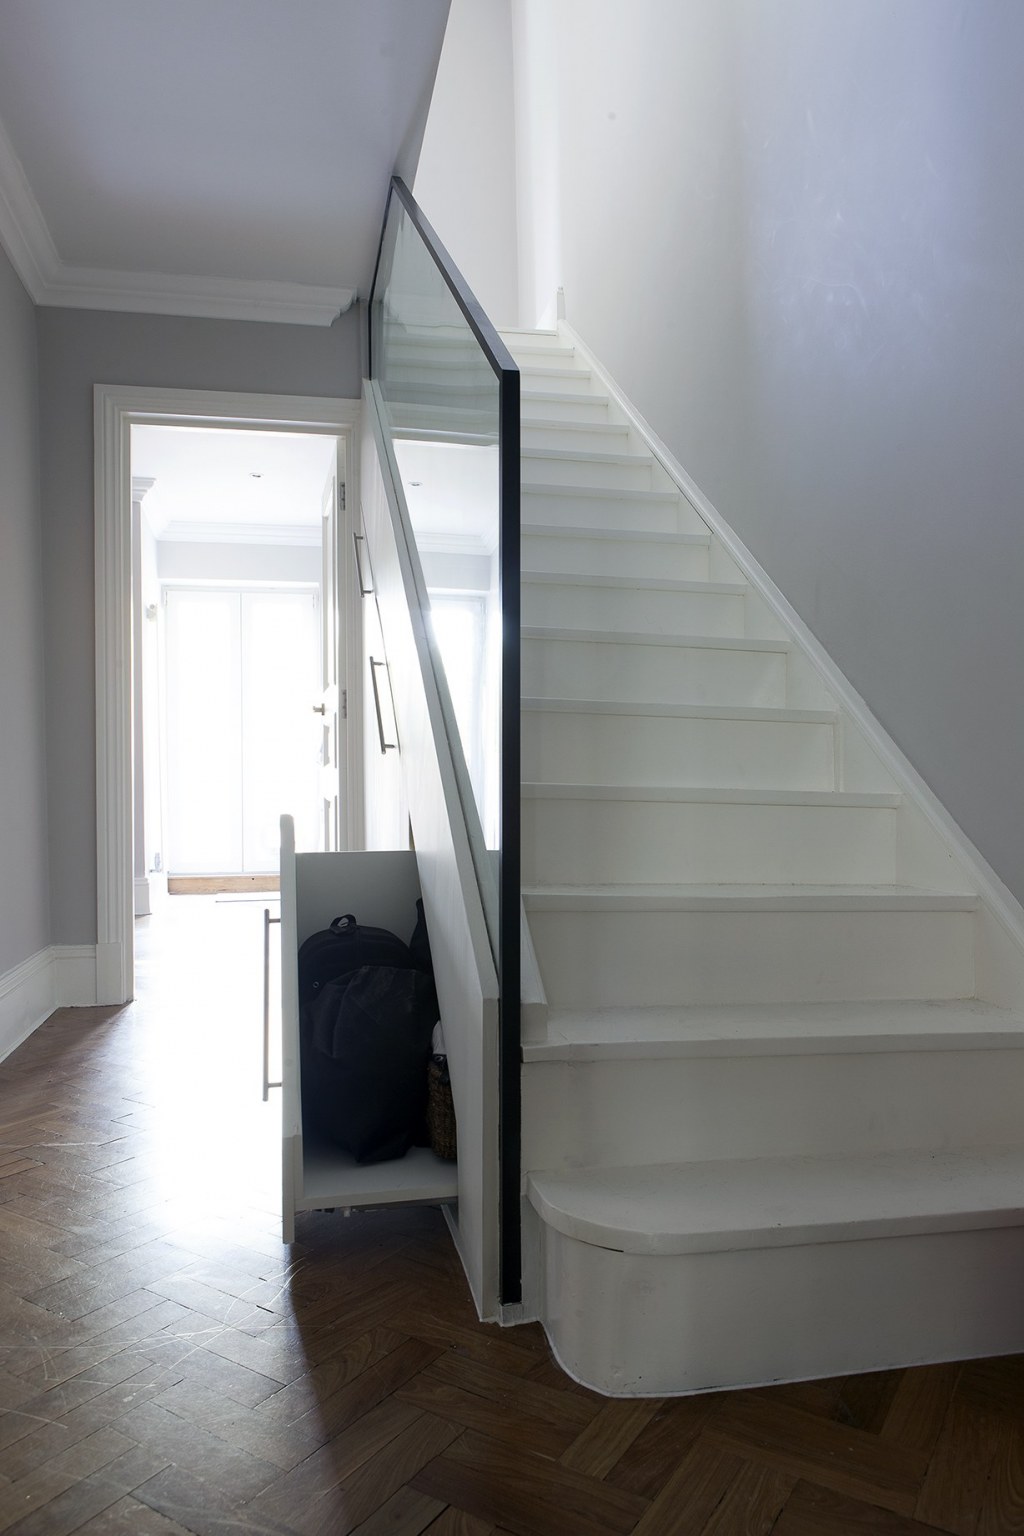 Kentish Town / Staircase glass banister and storage